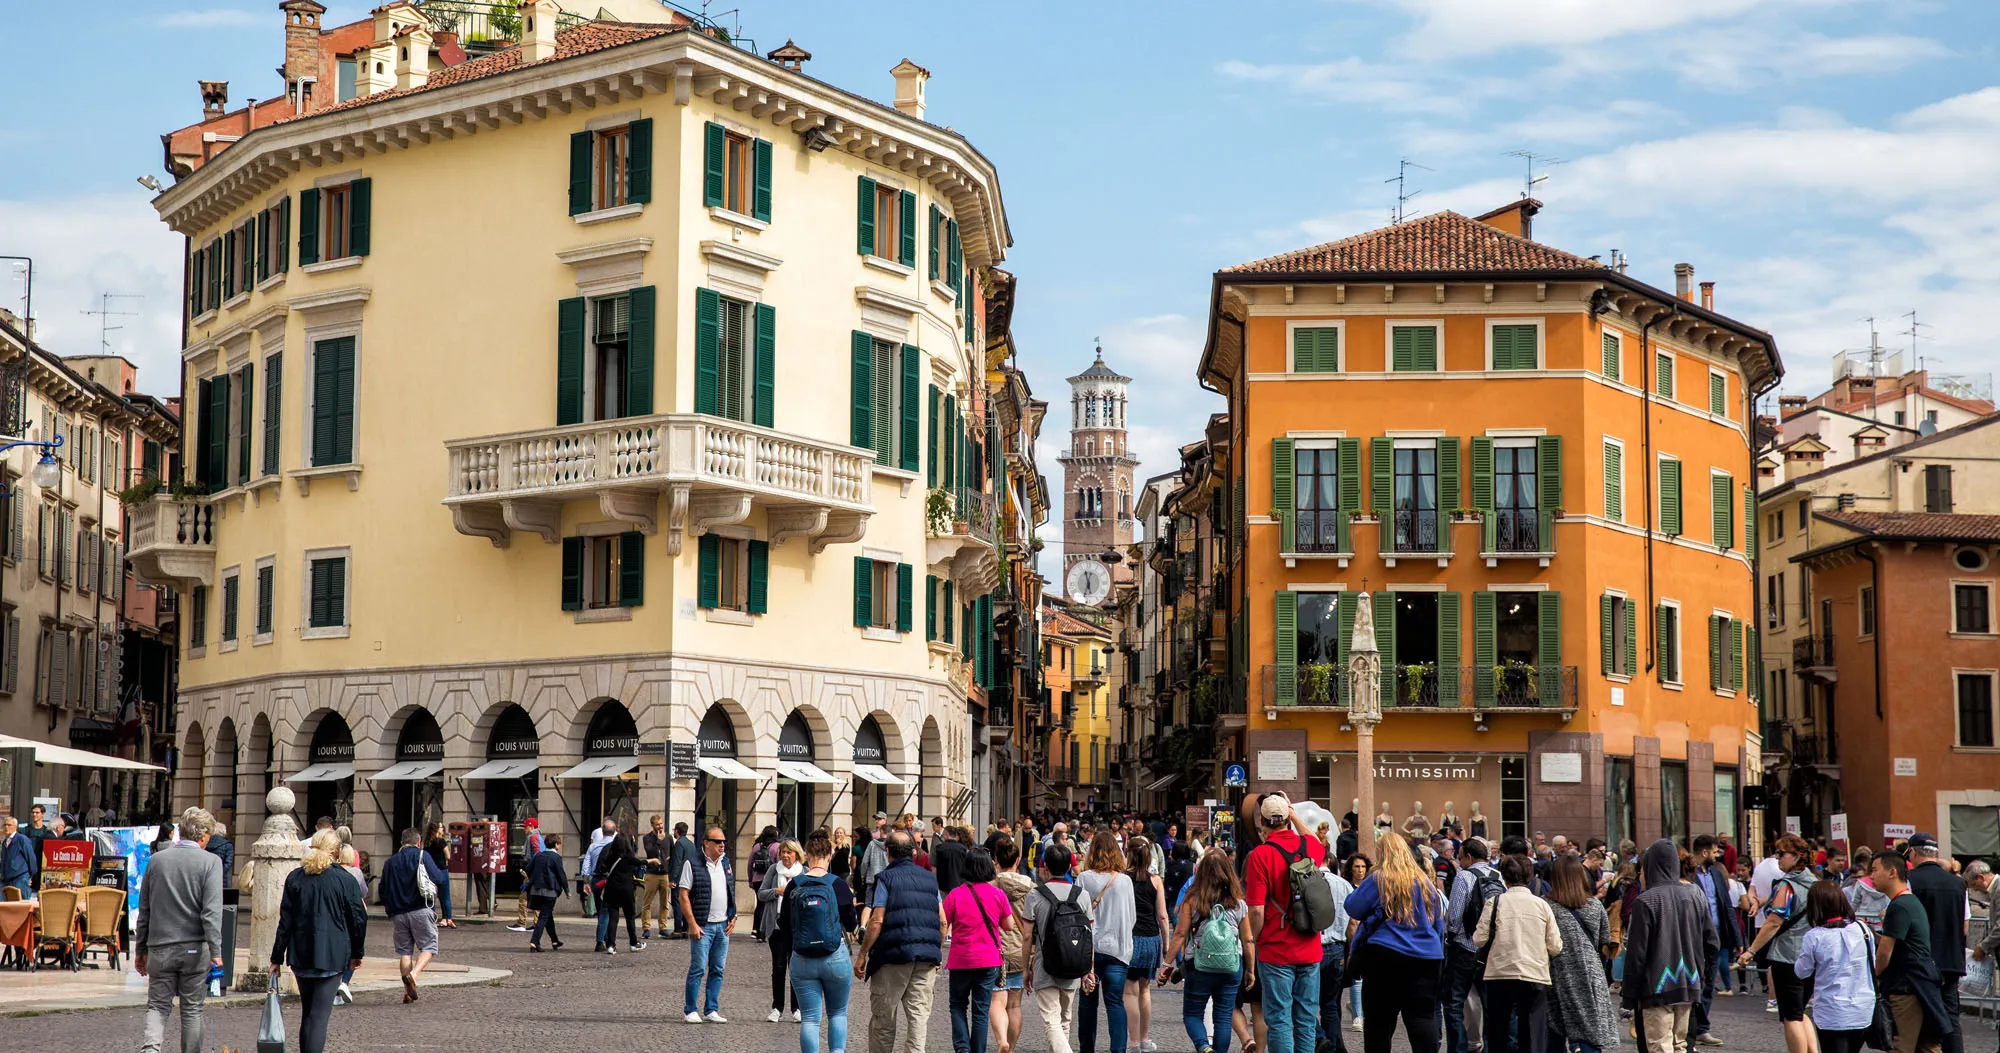 Featured image for “12 Best Things to Do in Verona, Italy”